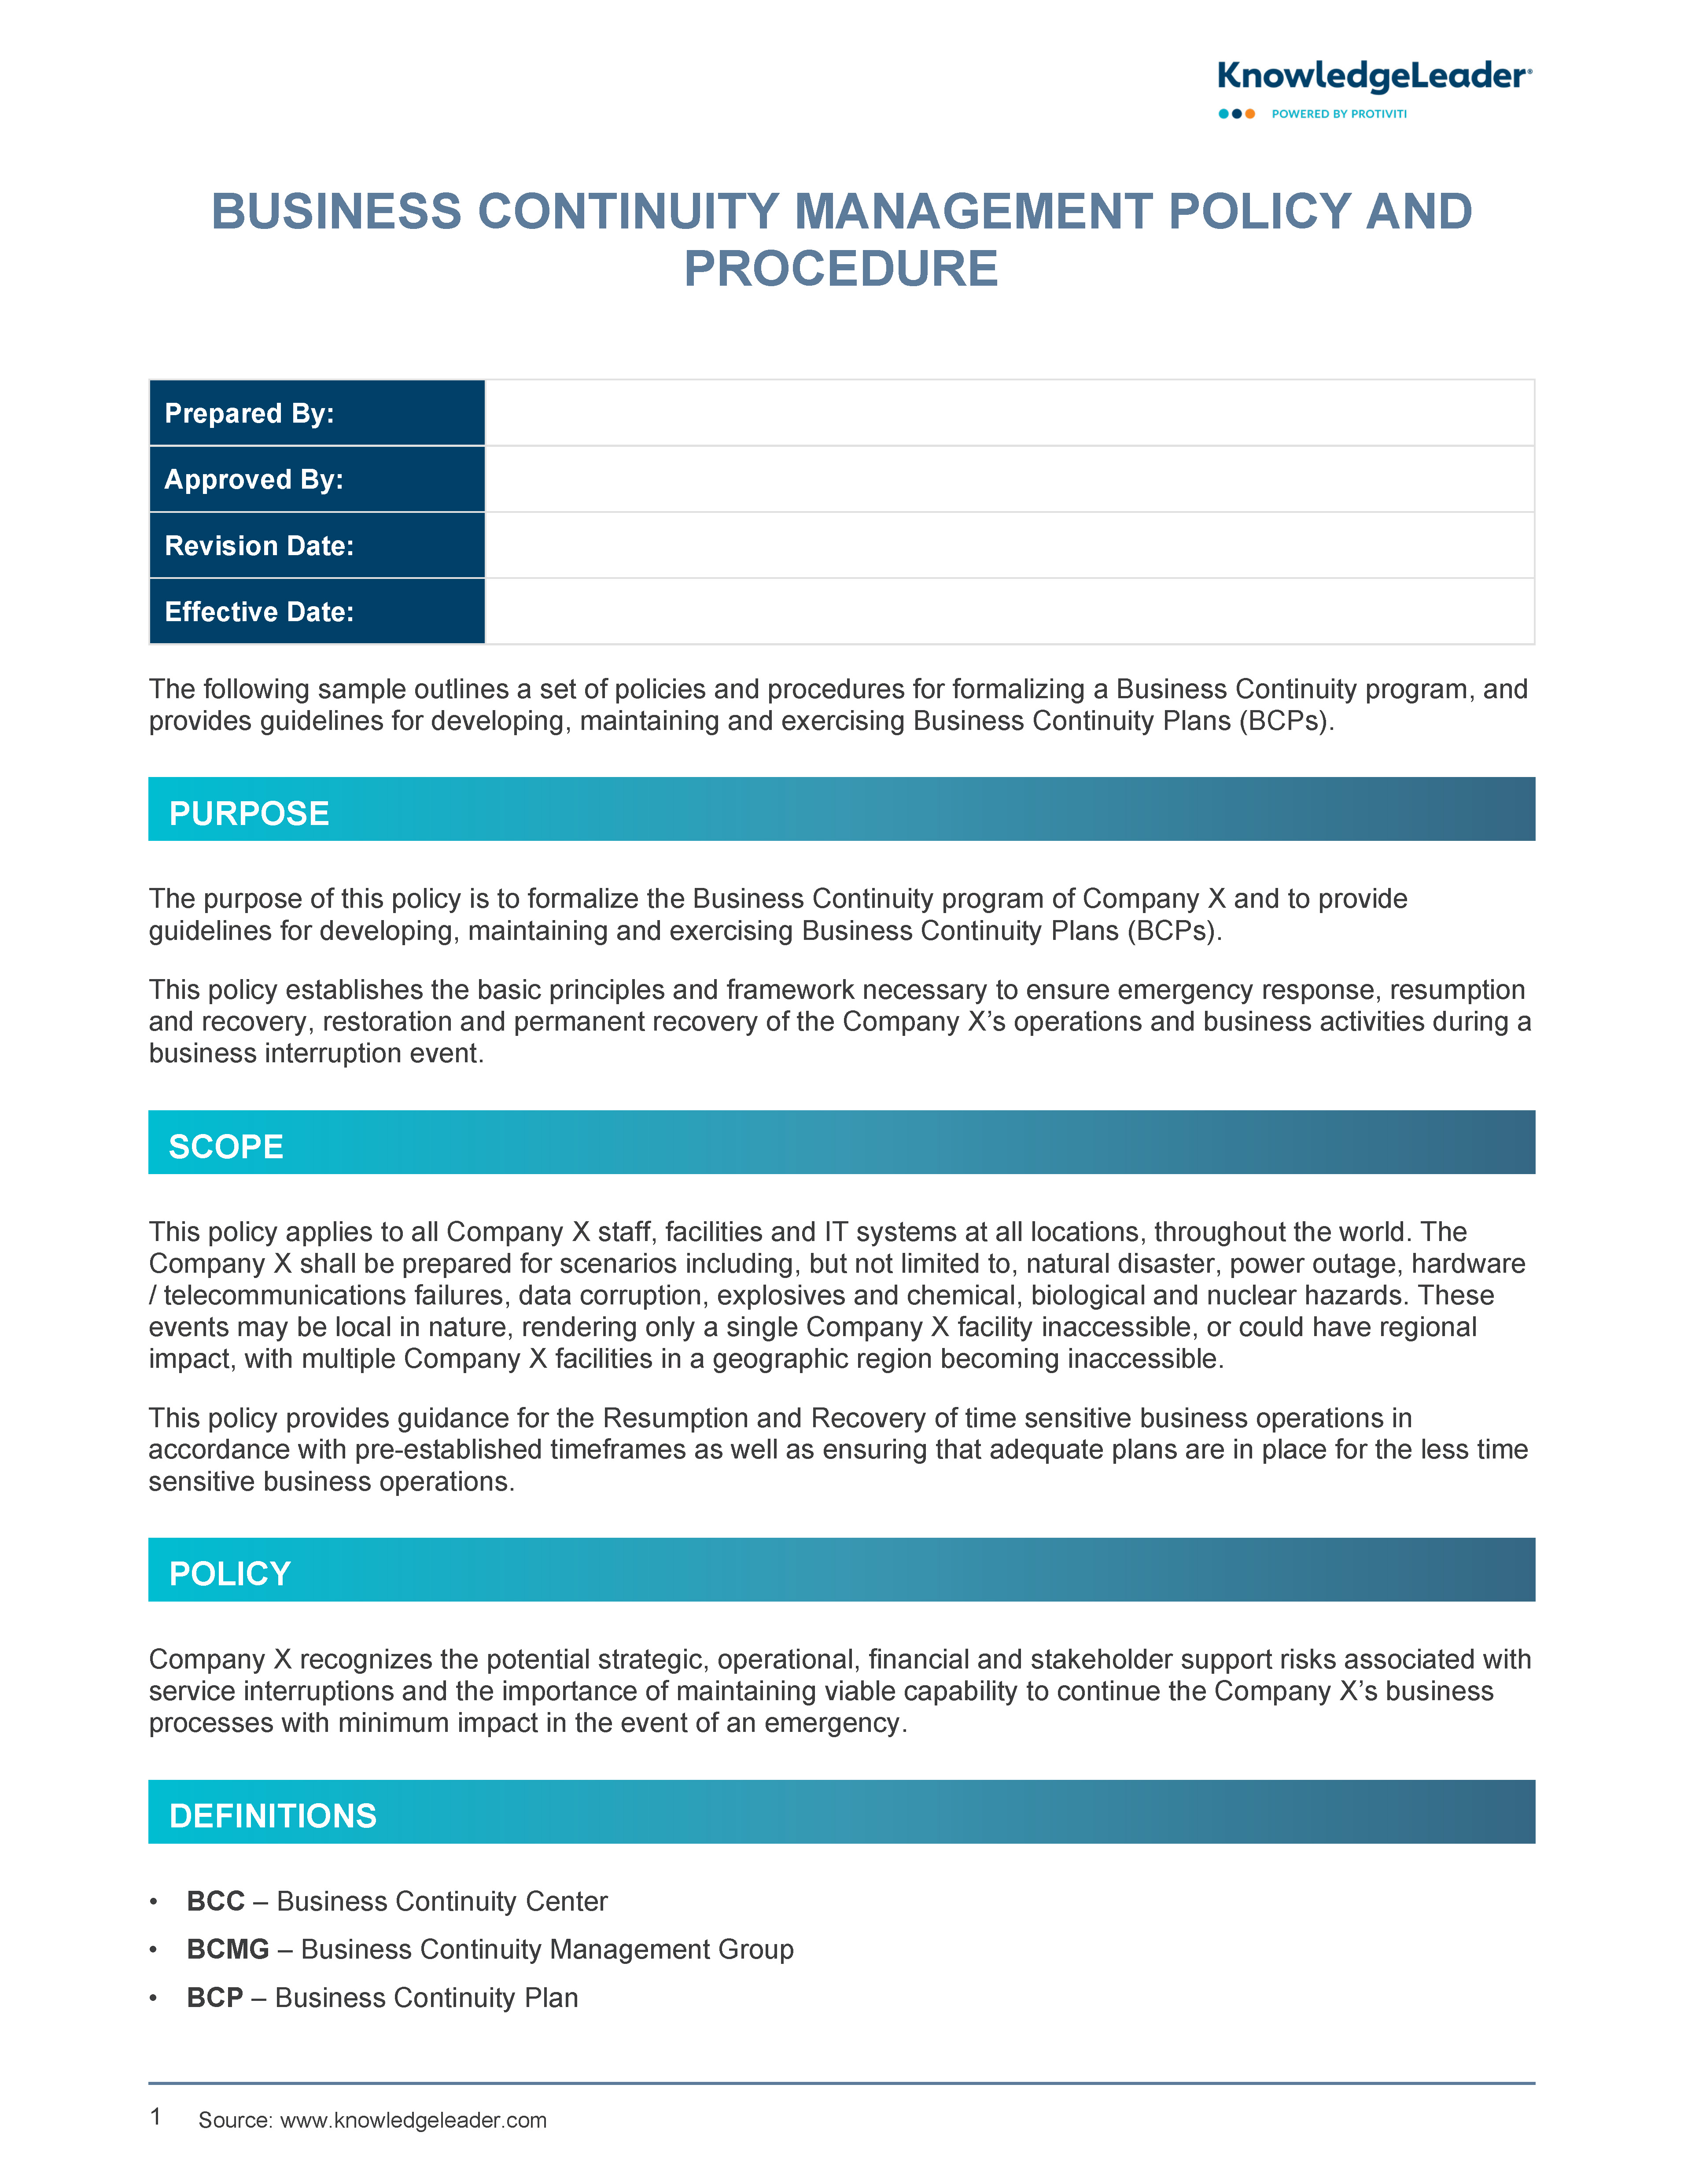 Screenshot of the first page of Business Continuity Management Policy